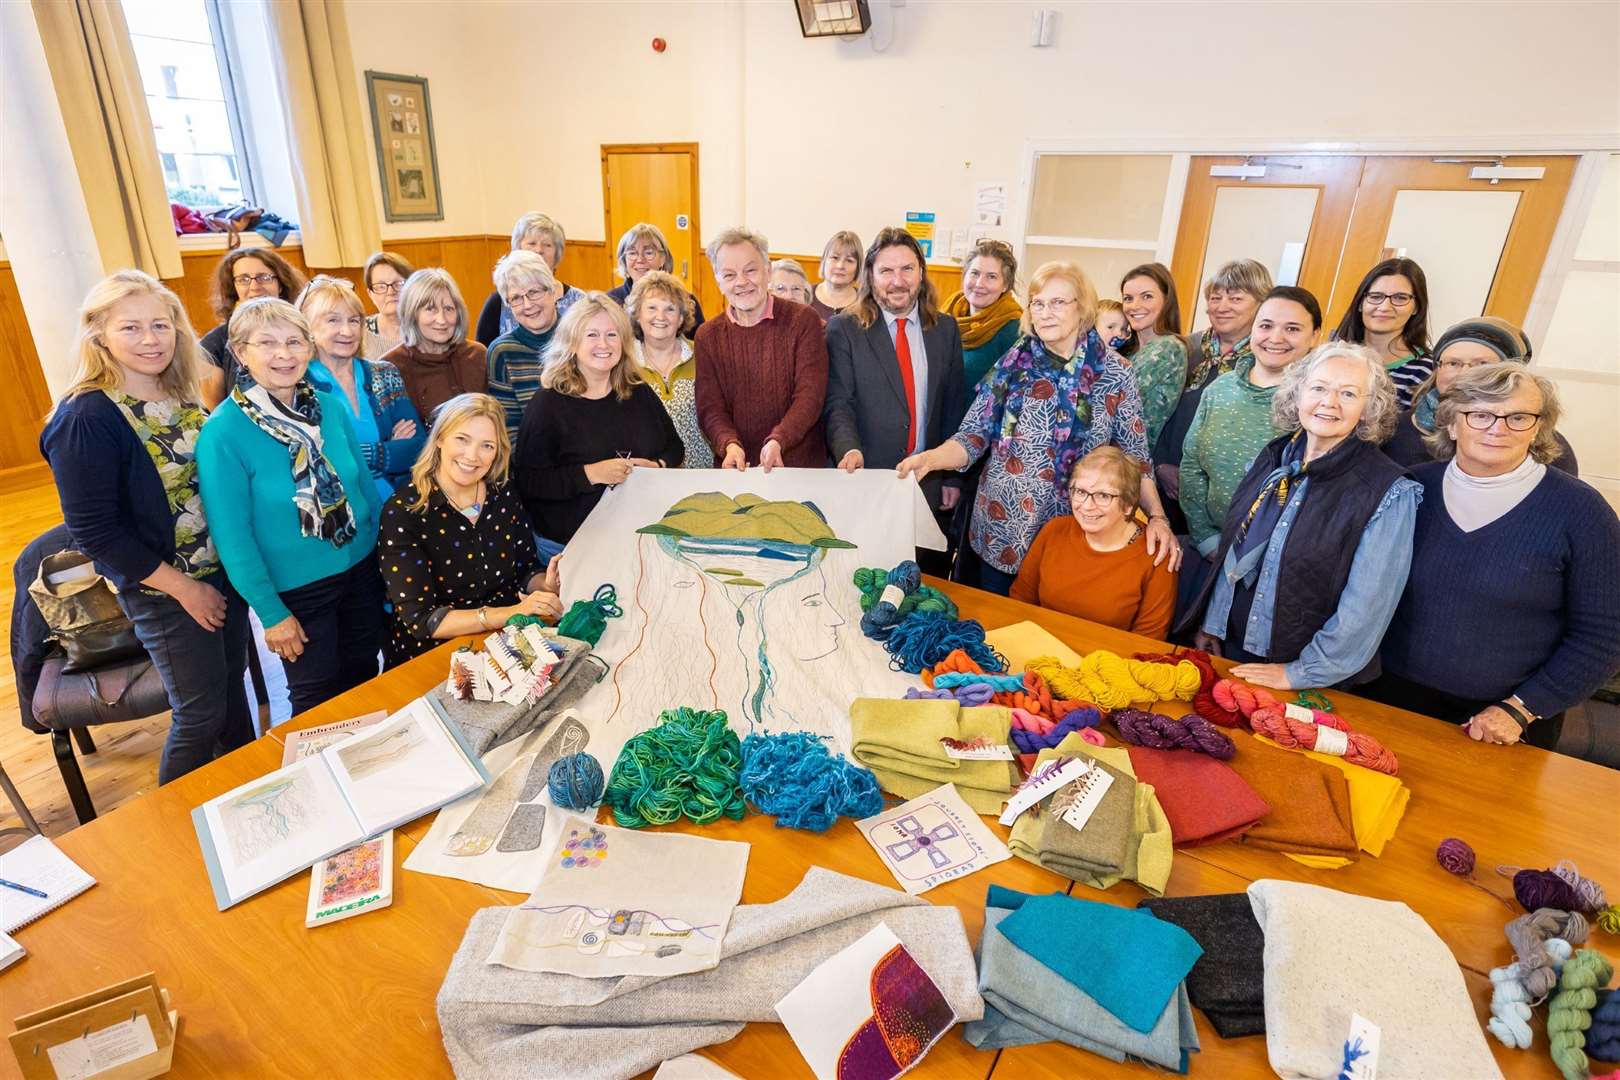 Designer Andrew Crummy, Cllr Russell Jones with Kirstie Campbell (stitch coordinator) and Spirit of the Highlands and Islands stitchers in Kingussie. Picture: HLH/Paul Campbell Photography